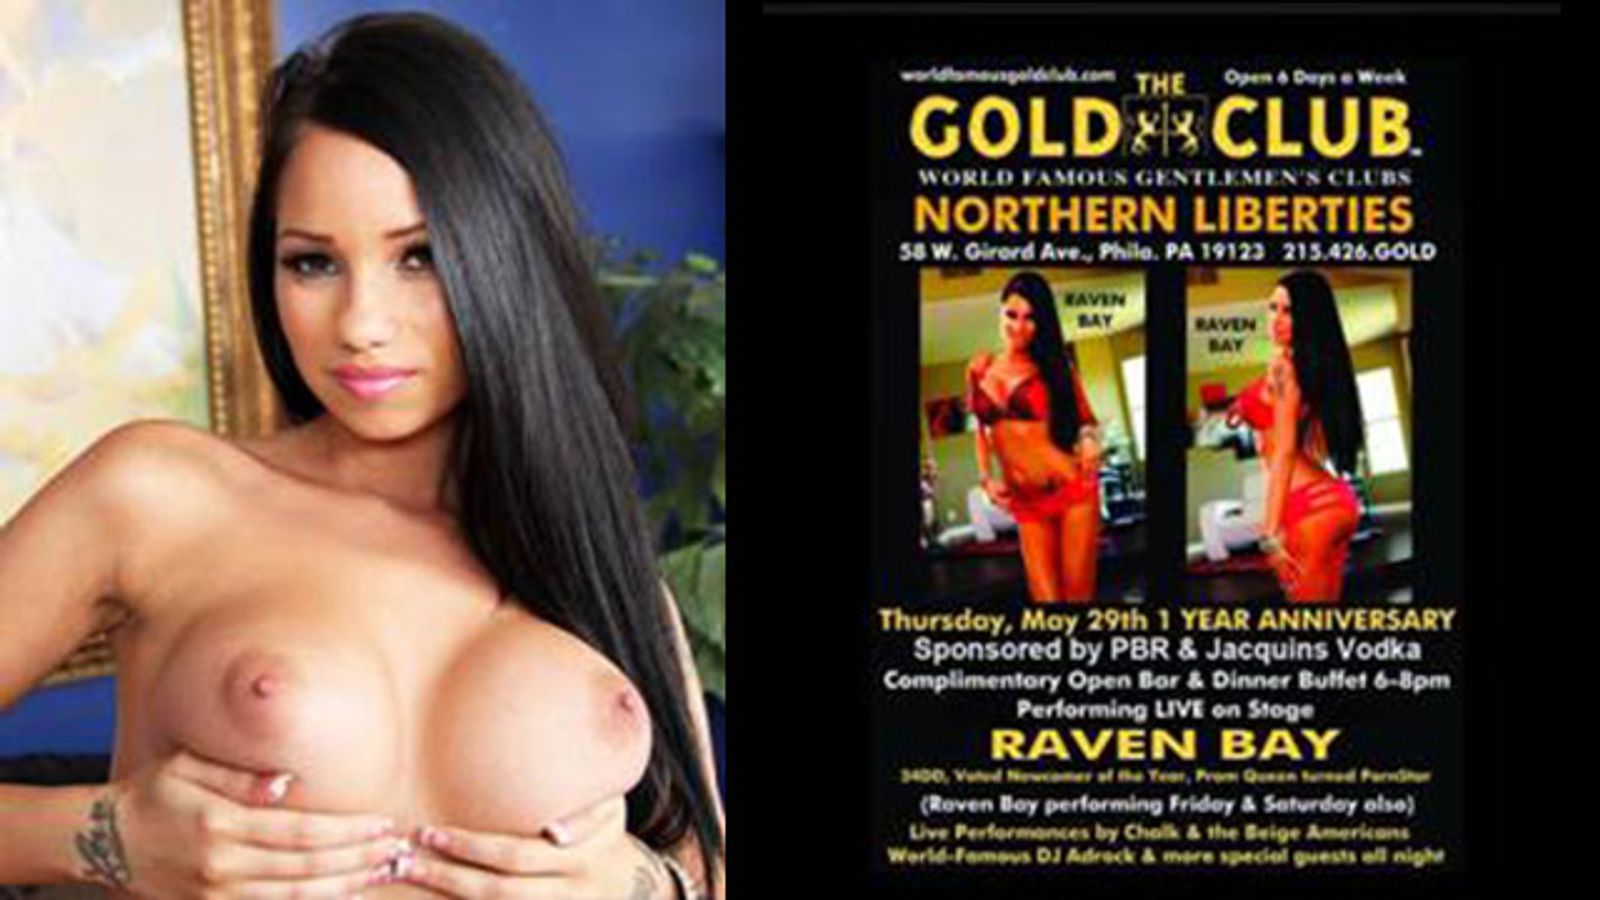 Raven Bay Feature Dancing at Gold Club in Philadelphia